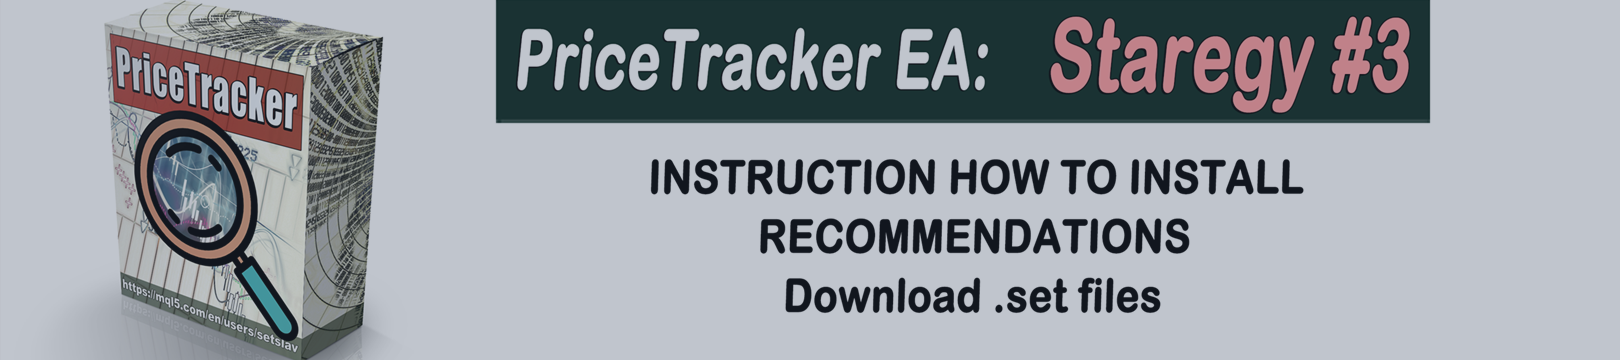 PriceTracker EA Strategy #3: INSTRUCTION HOW TO INSTALL RECOMMENDATIONS Download .set files